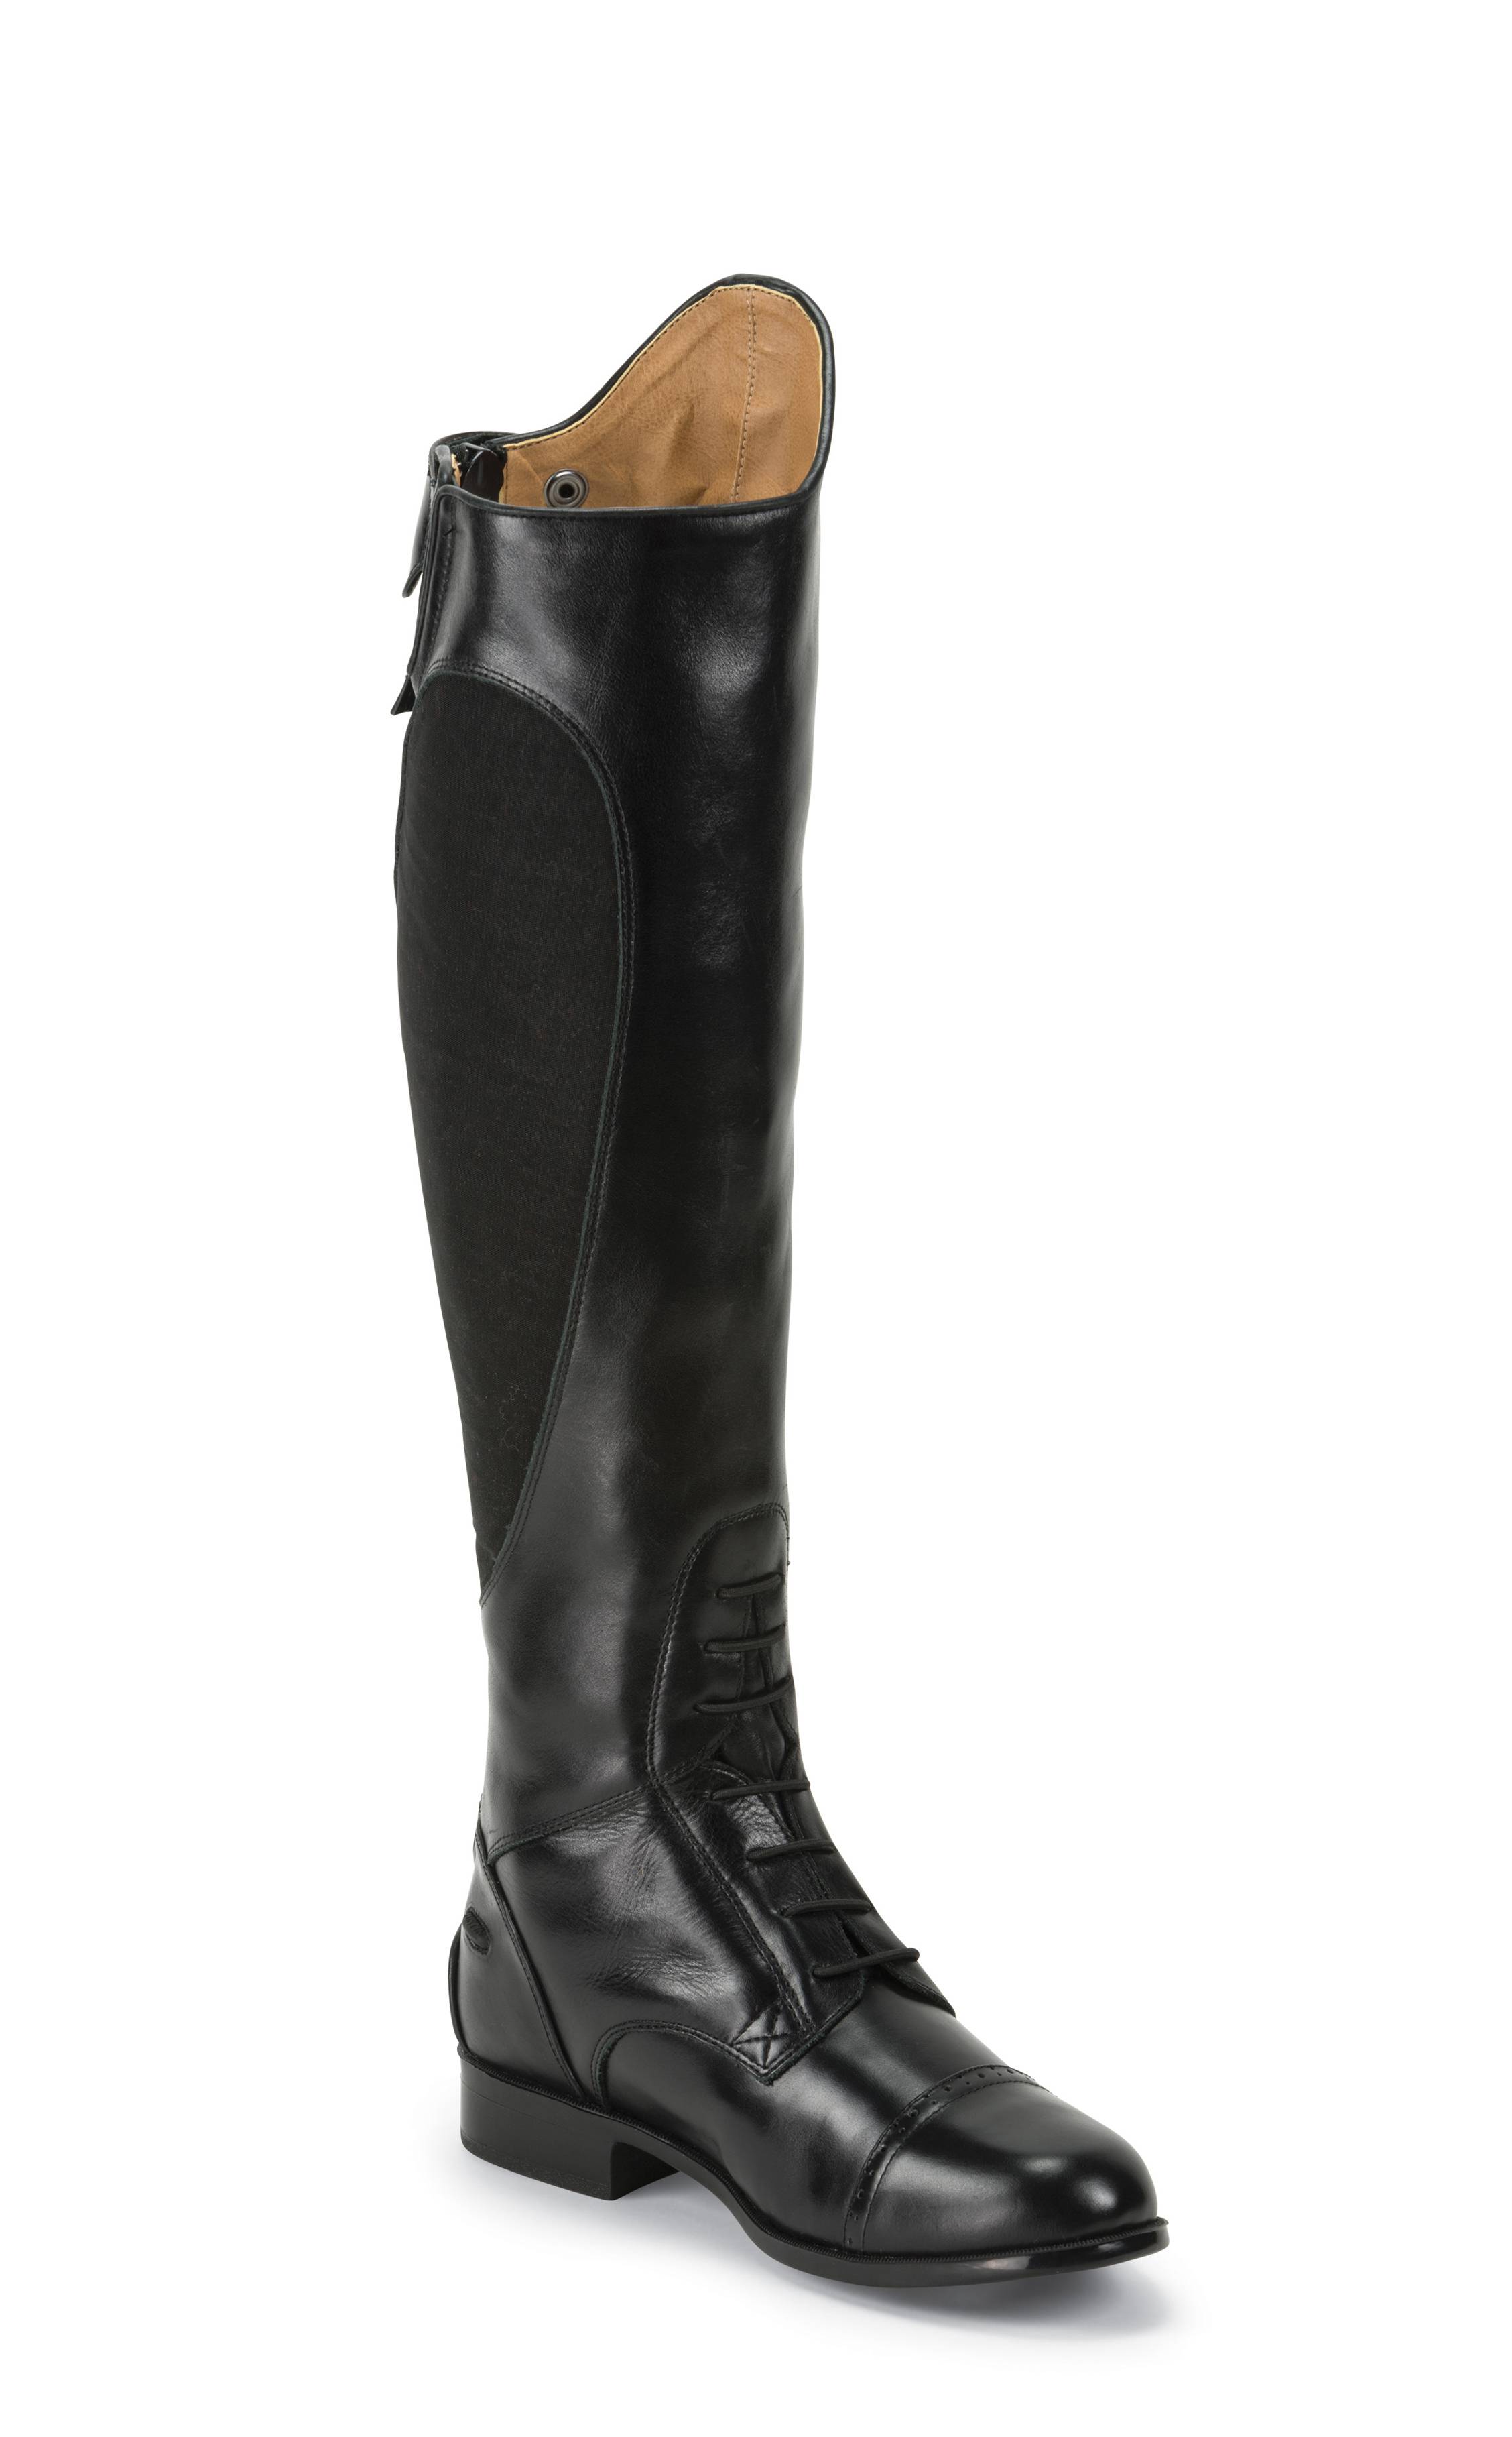 Justin Windshire Leather Field Boots - Ladies